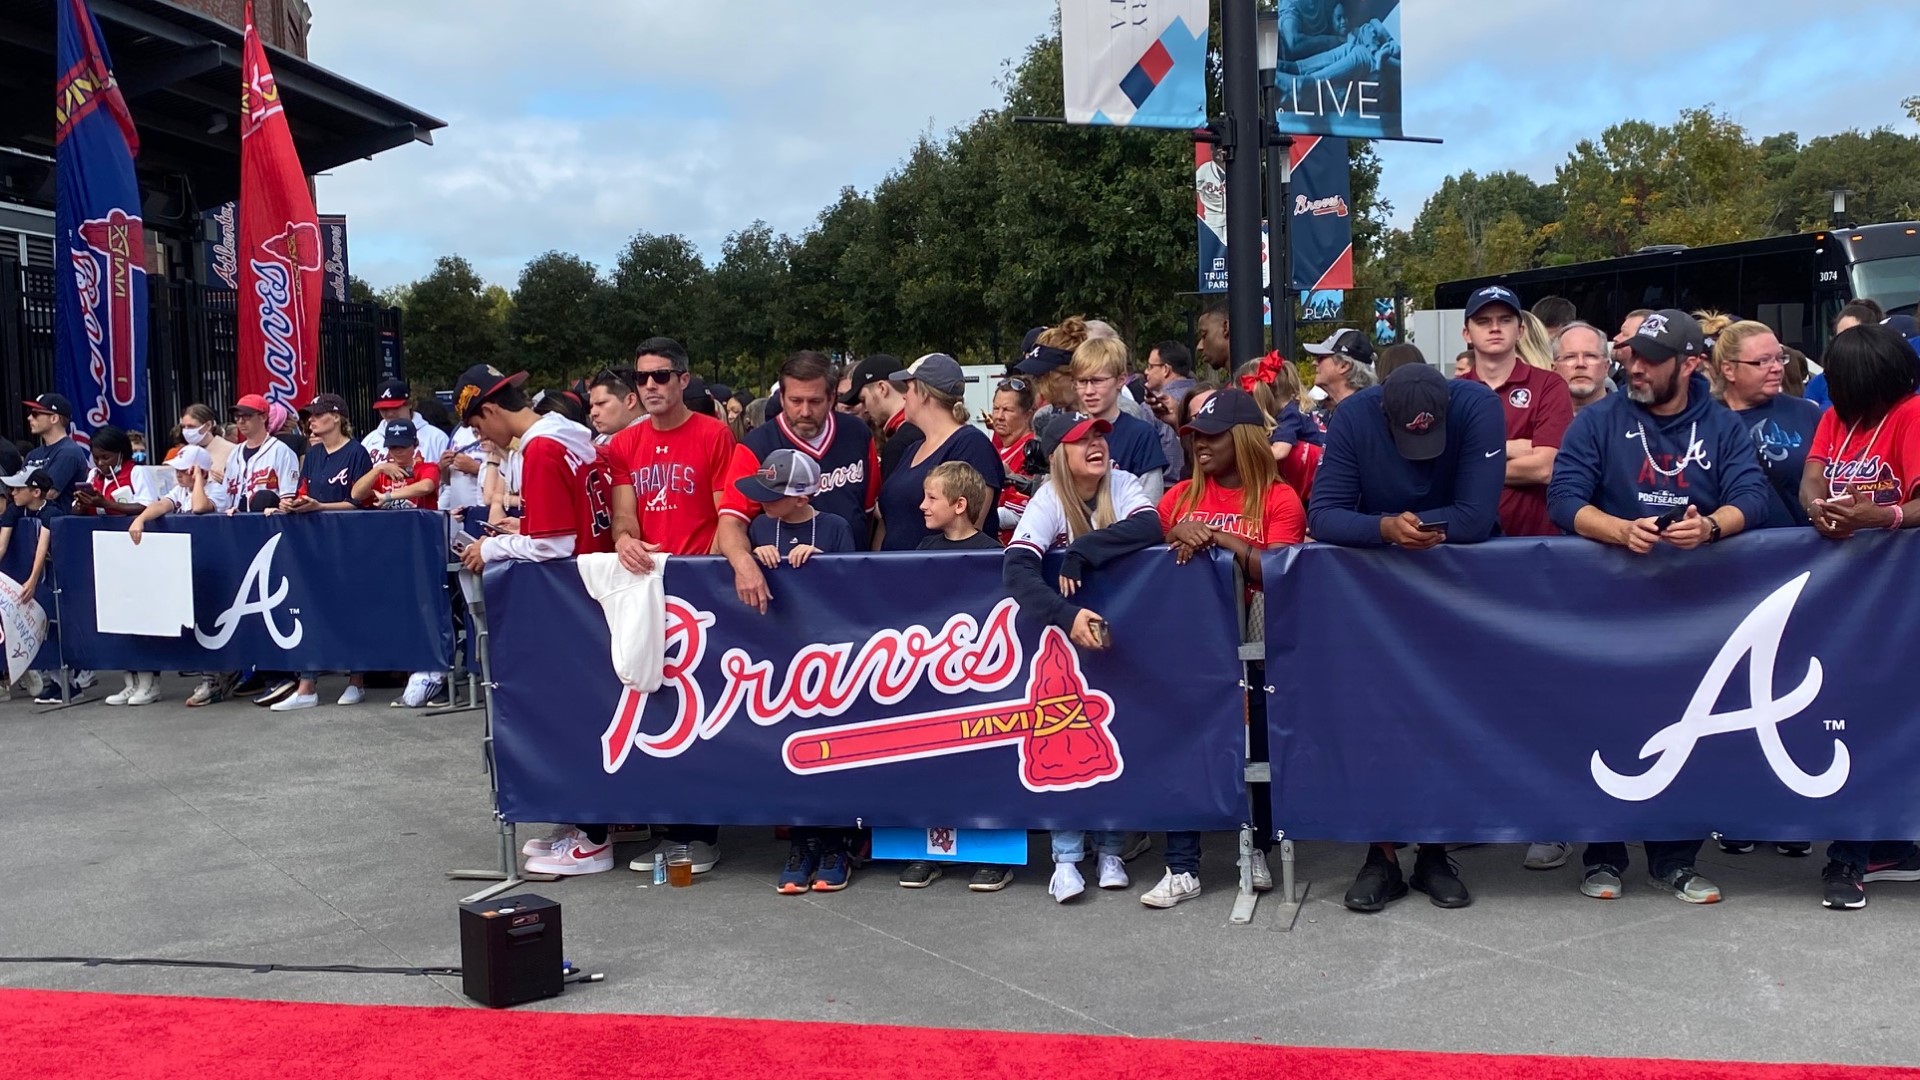 Fans were invited to send off the Braves to Houston with a bang at Truist Park.